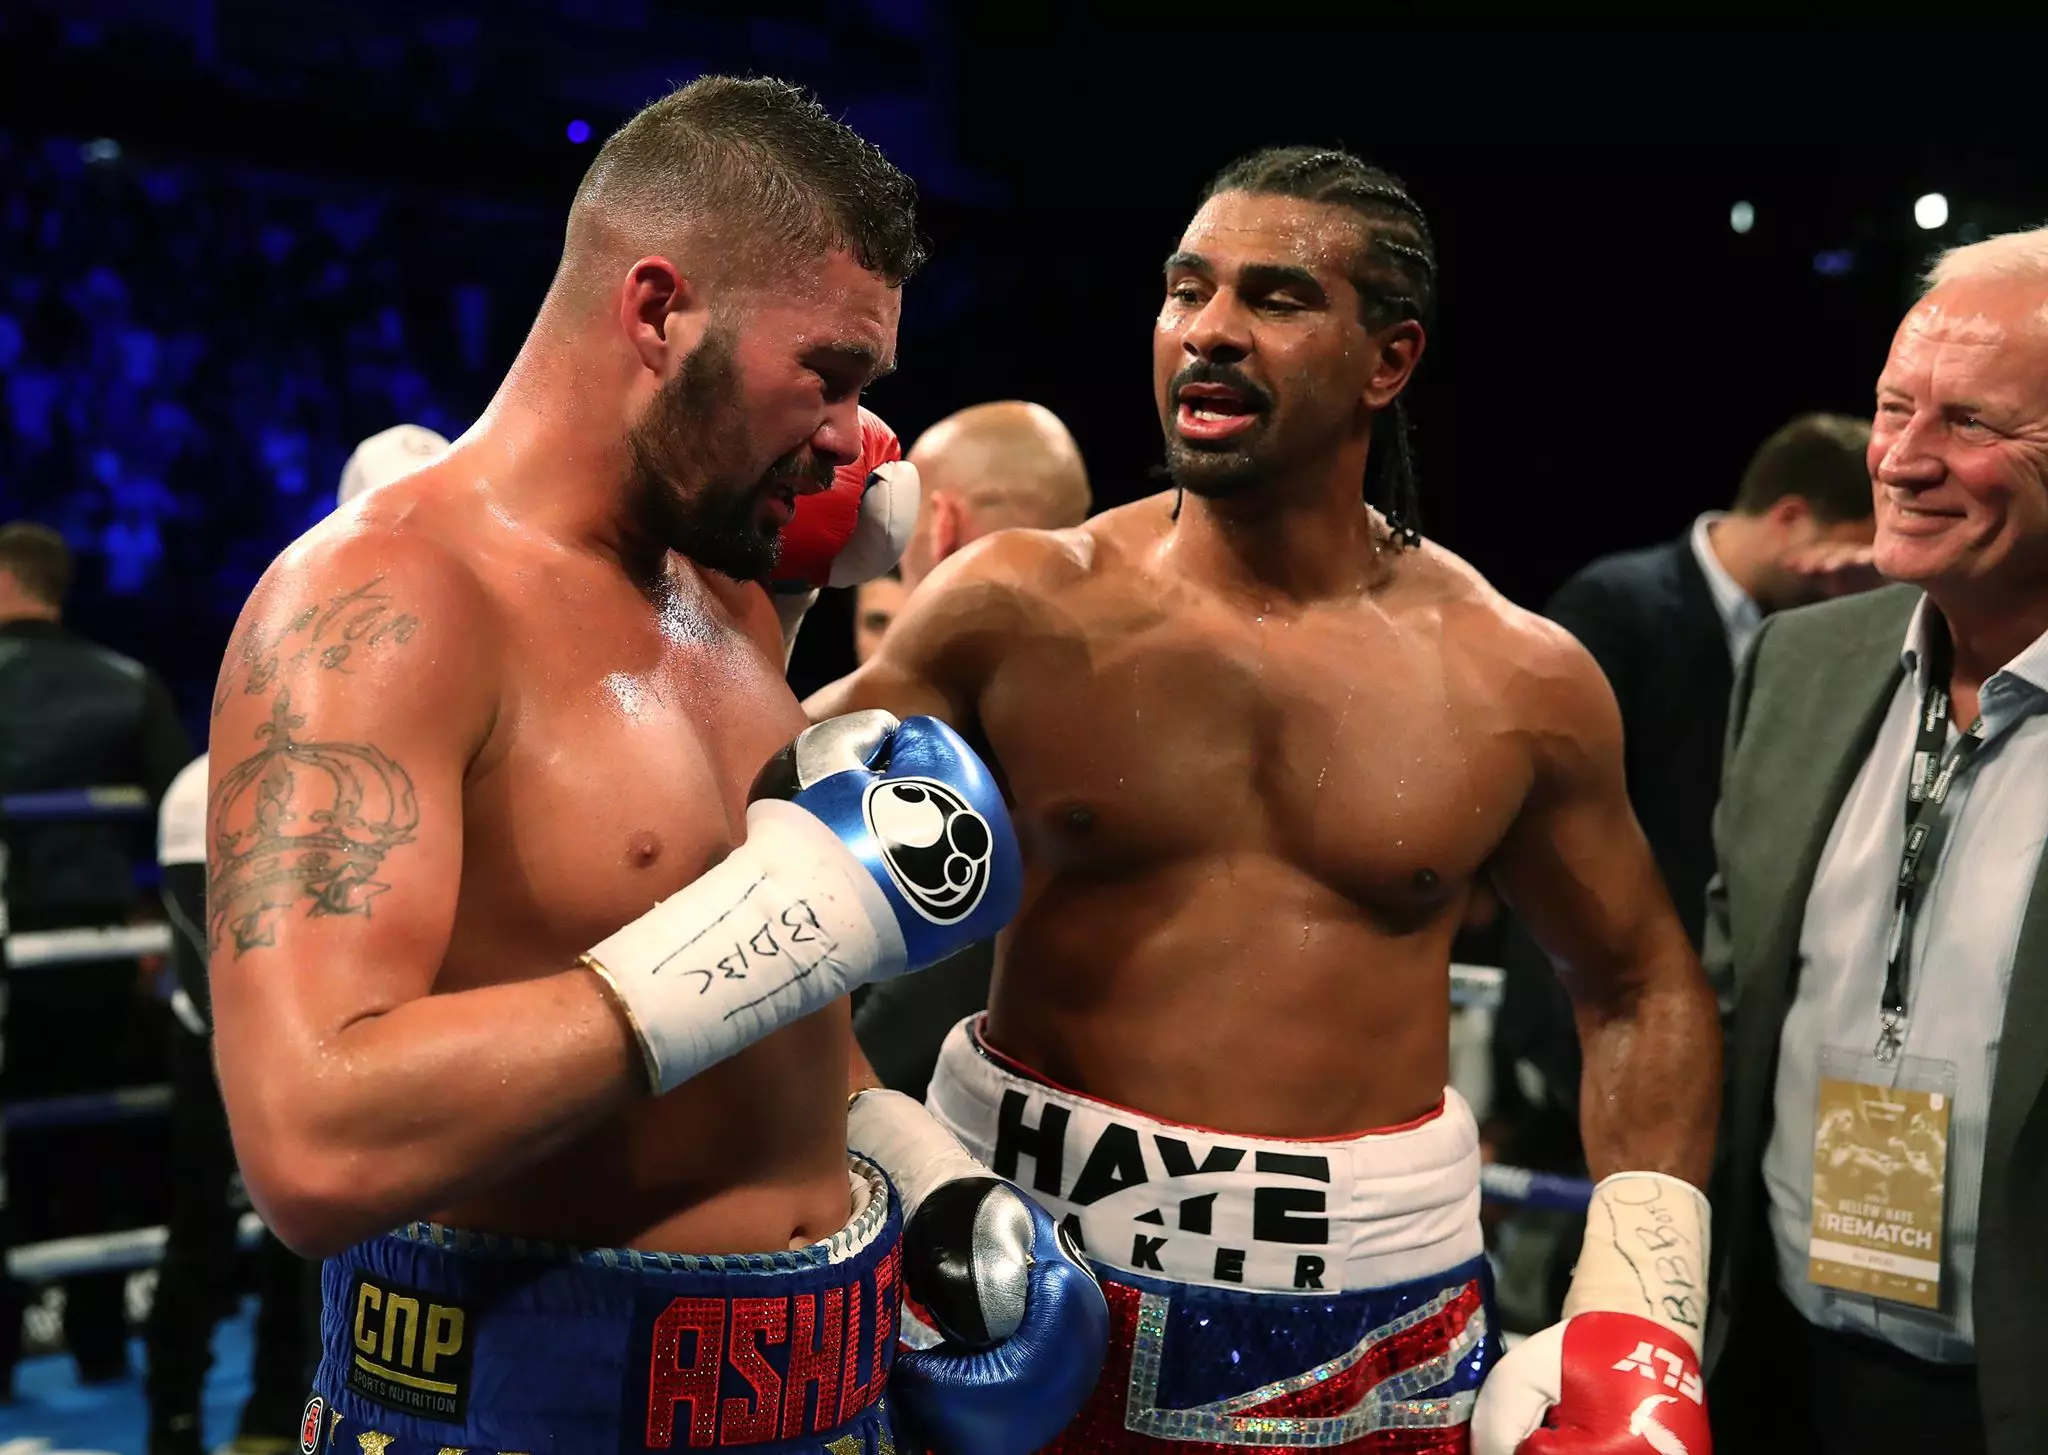 Haye and Bellew embrace. Image: PA